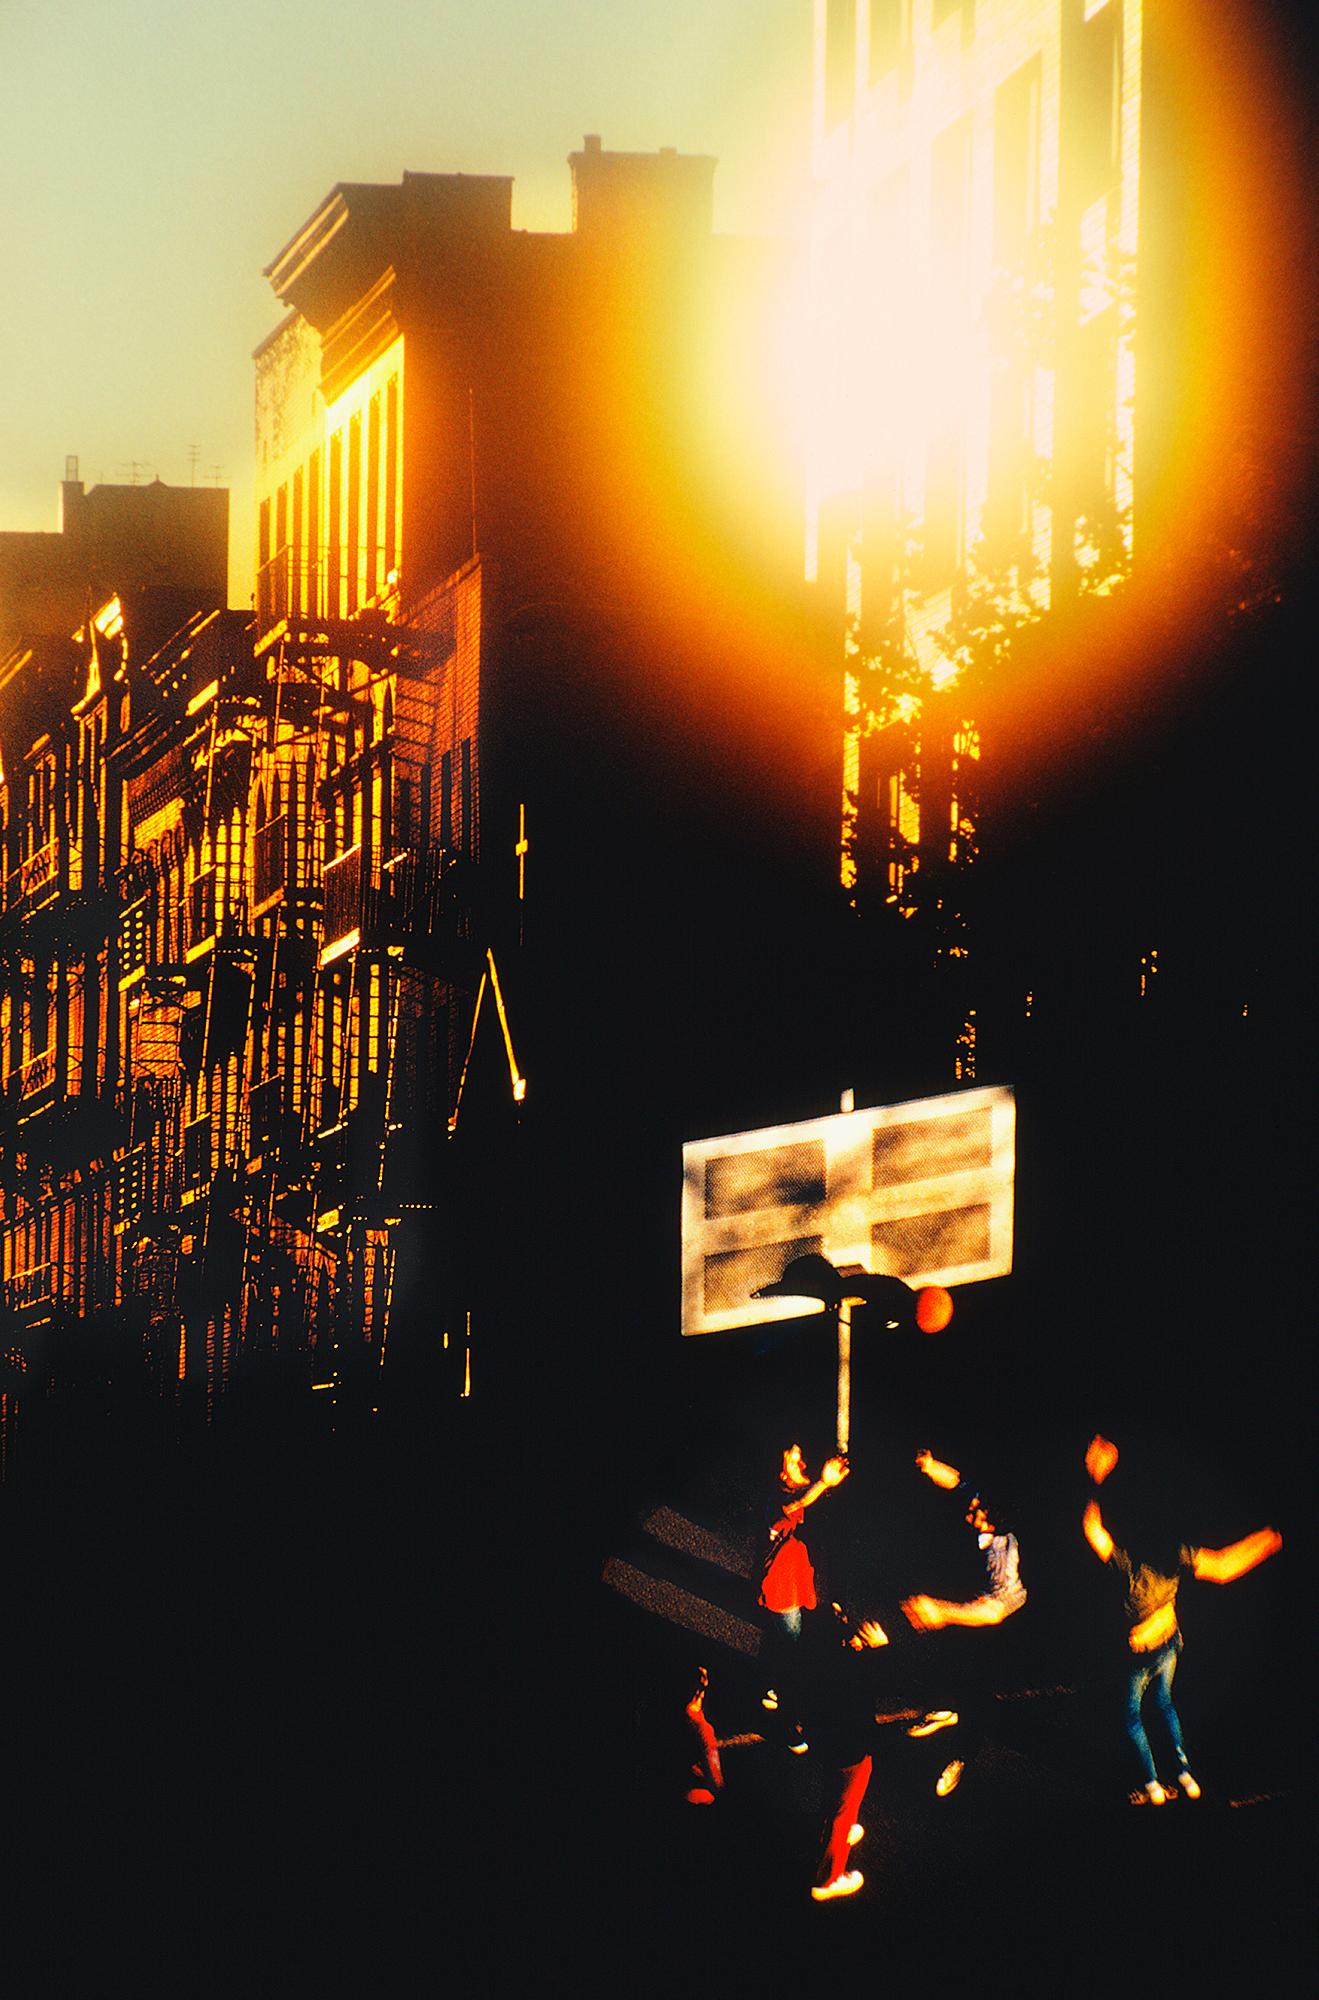 Mitchell Funk Figurative Photograph - Street Basketball with Angelic Light Burst in Gold